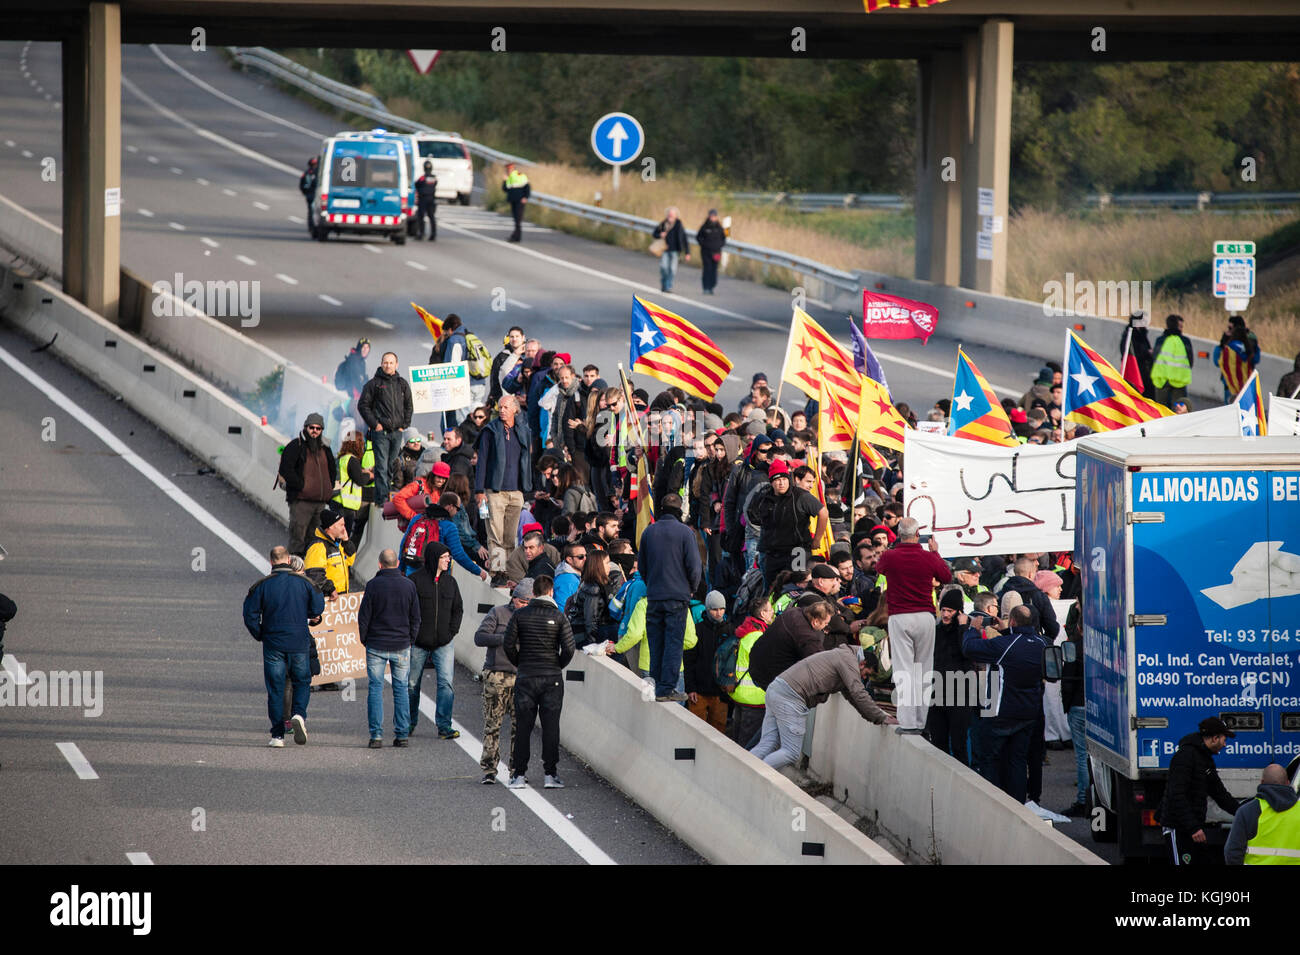 Girona, Spain. 8th Nov, 2017. Protesters block the AP7 highway during the strike in Catalonia to protest against the imprisonment of pro-independence leaders, in which protesters are blocking various roads and trains tracks. The Central independent and Civil Servants Union (CSIF) has refused the strike and opposed to the protests. Credit: Pablo Guillen/Alamy Live News Stock Photo